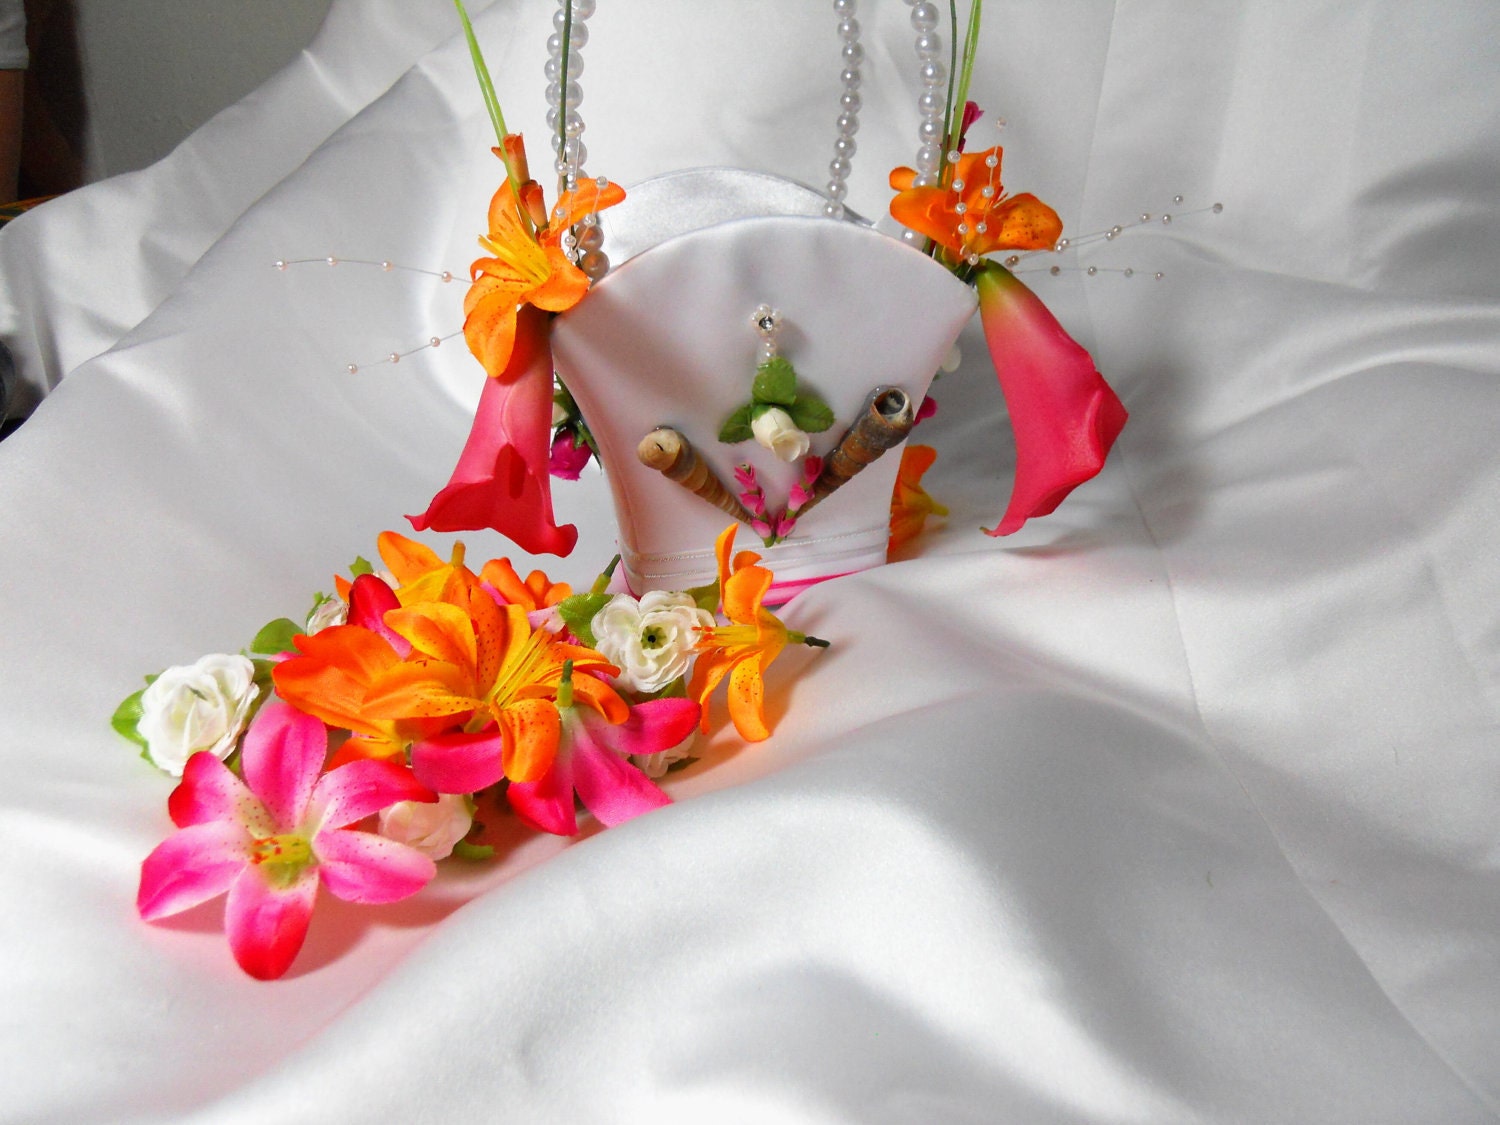 Tropical Flower Girl Basket Headband And Bracelet With Pink And Orange Lillies For Your Wedding Day